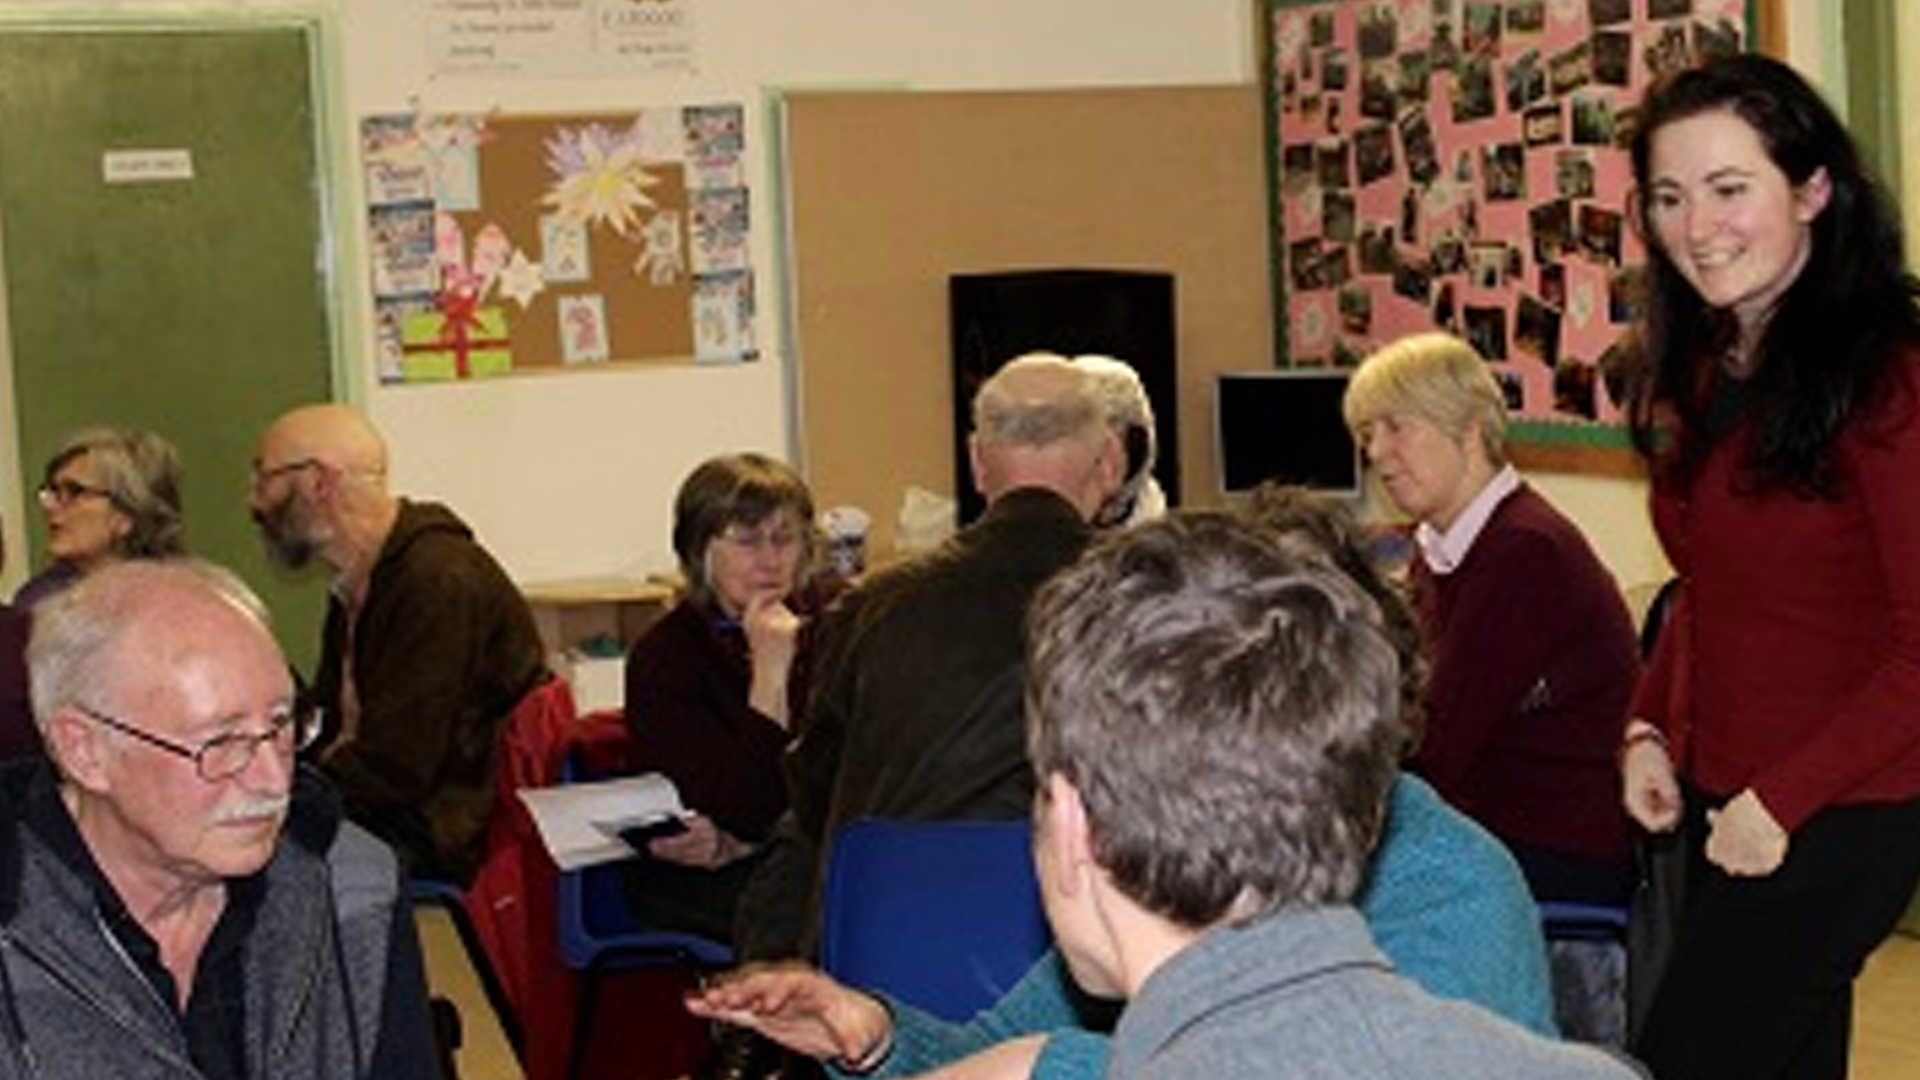 Whalley Range Labour - Community and Diversity Meeting in Whalley Range 4